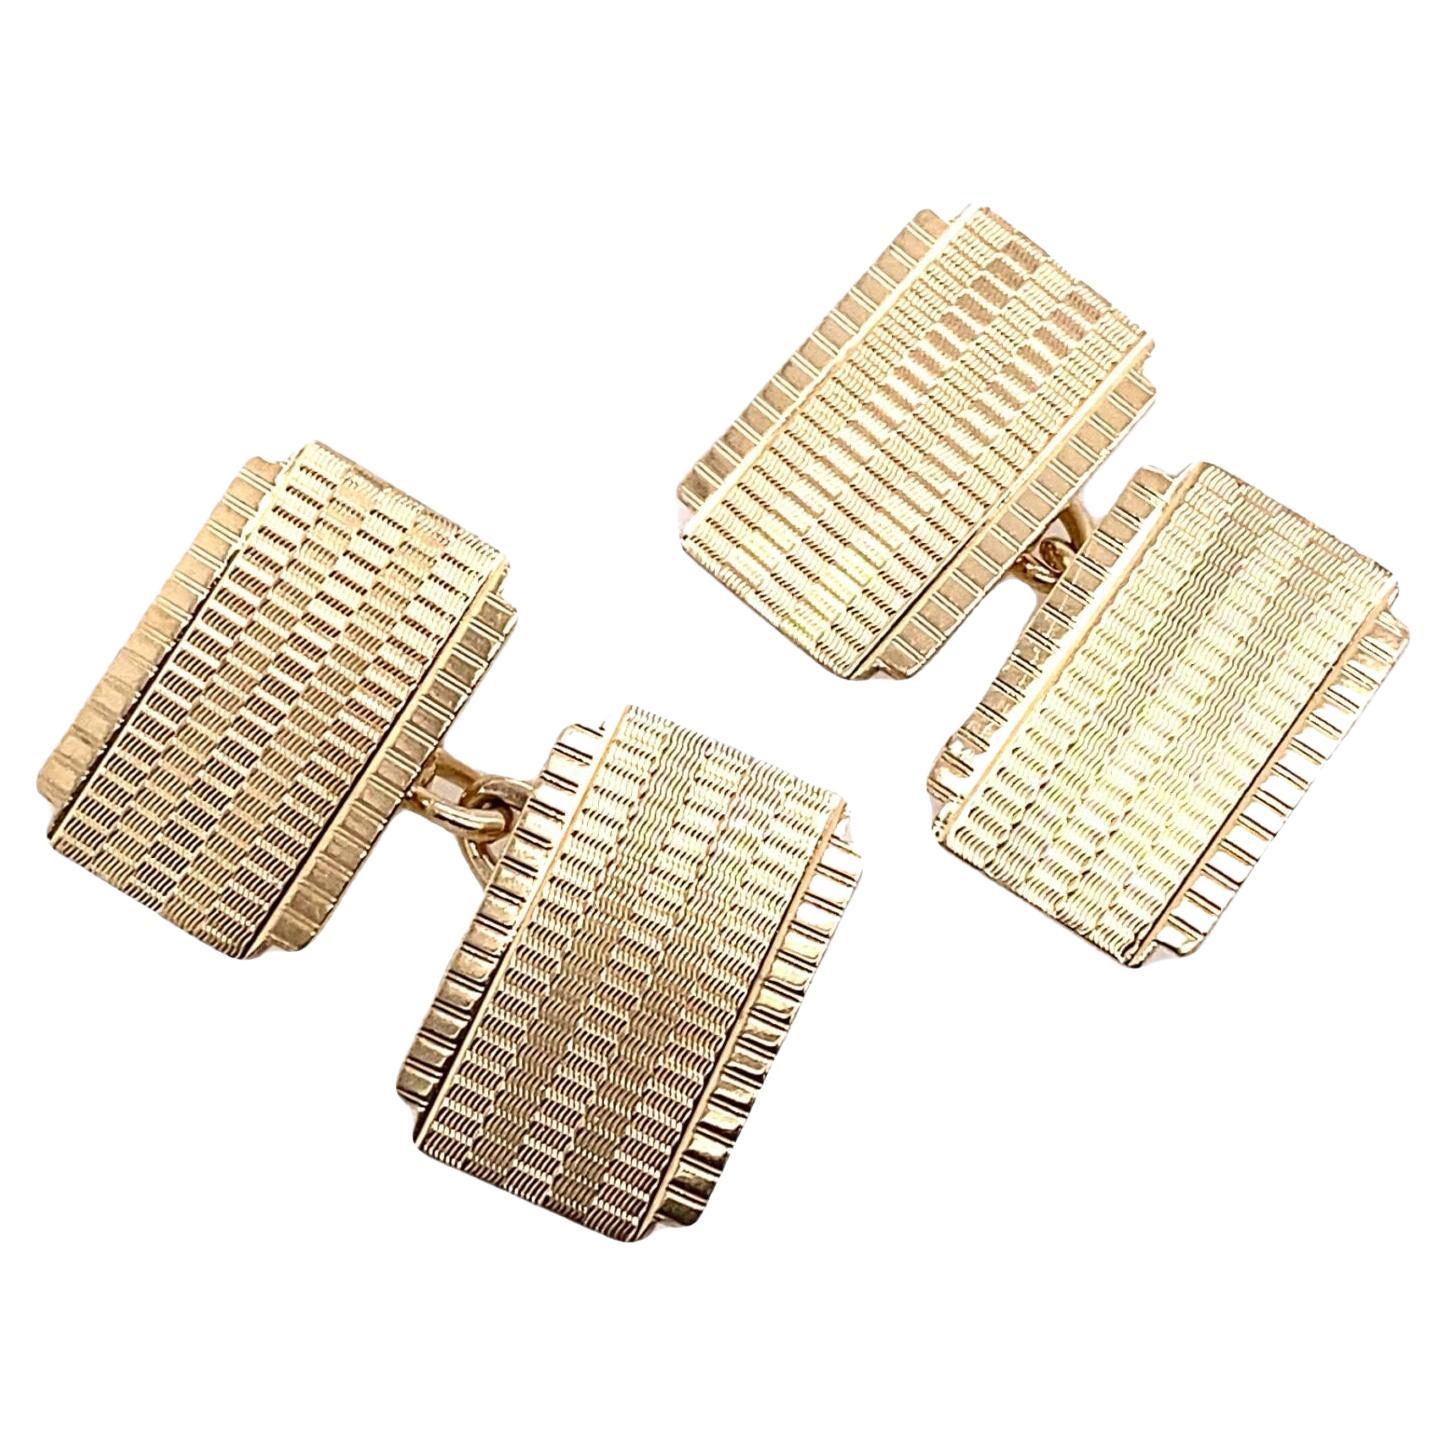 Vintage Double Sided Fully Engine Turned Cufflinks in 9ct Gold